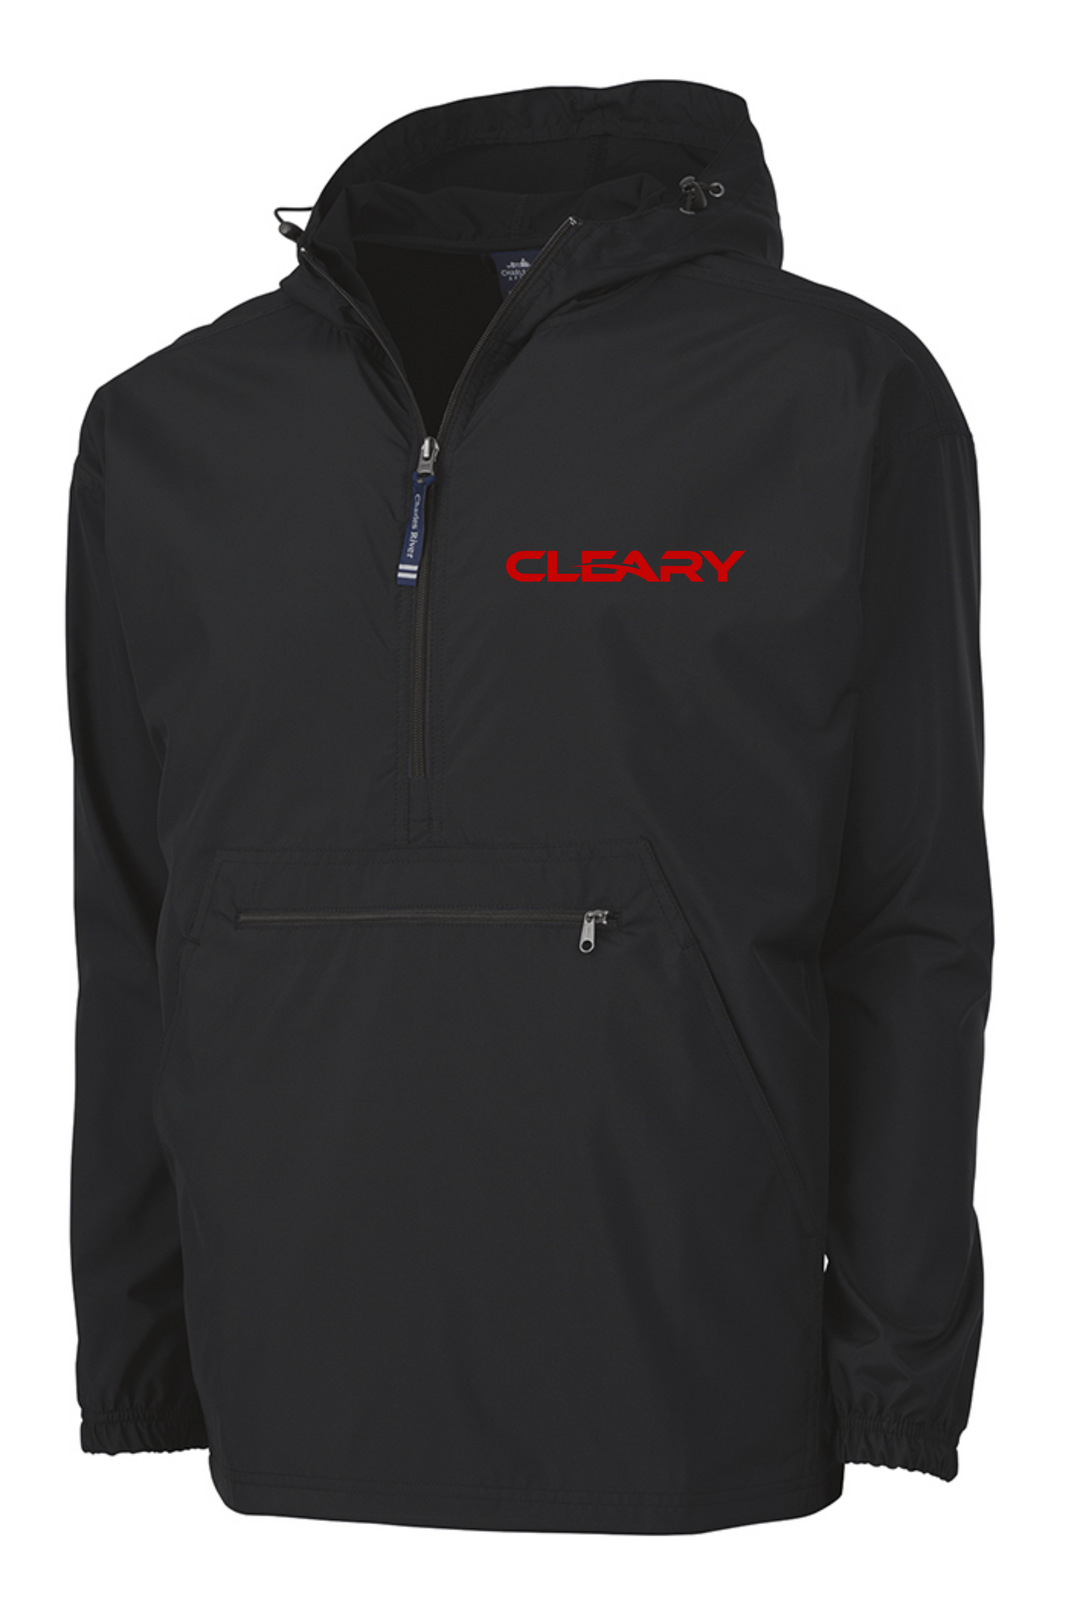 Cleary's Pack-N-Go Pullover Black